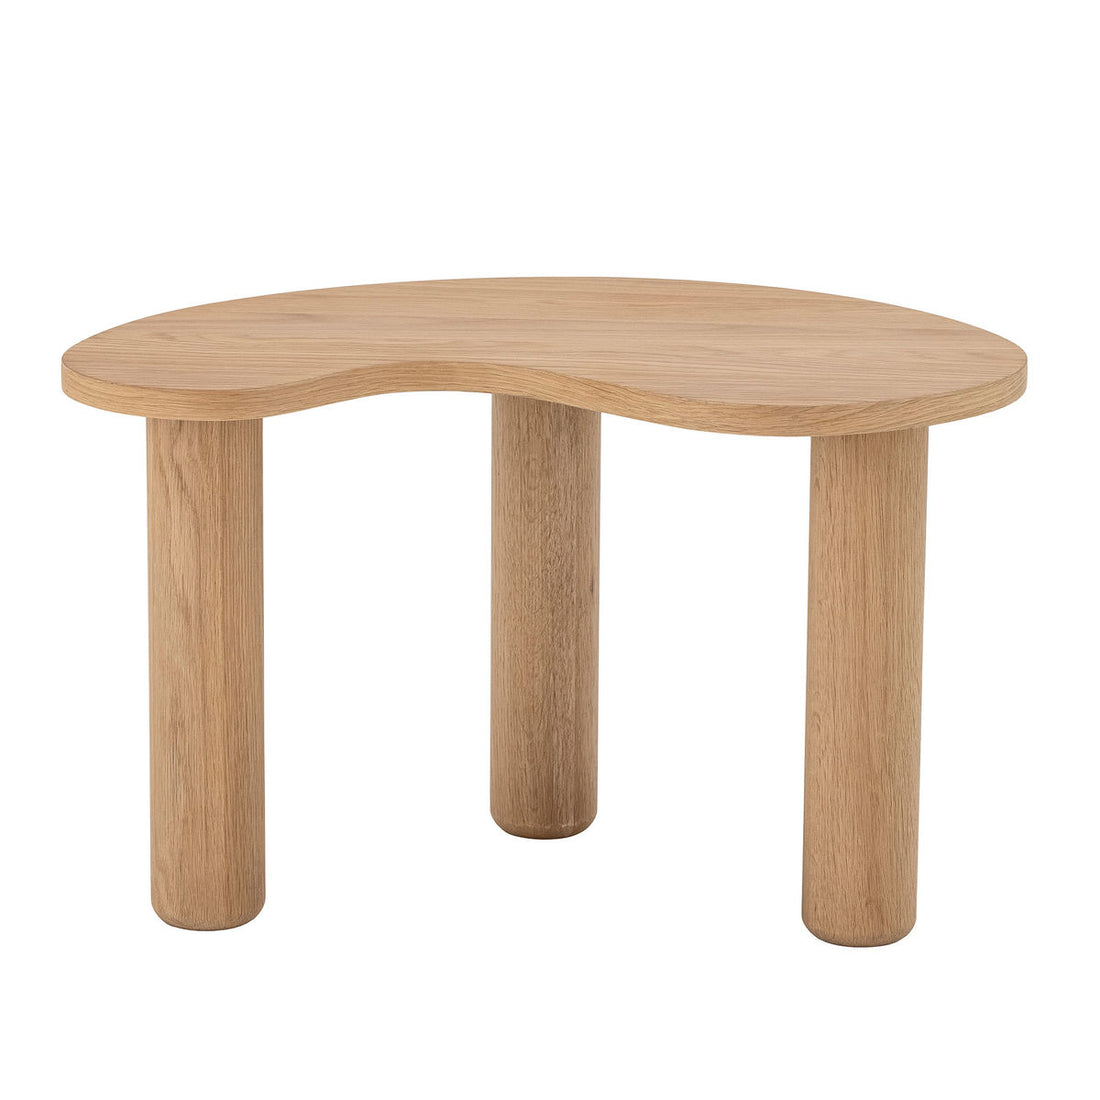 Bloomingville Luppa Cafetle Table, Nature, Rubber Tree